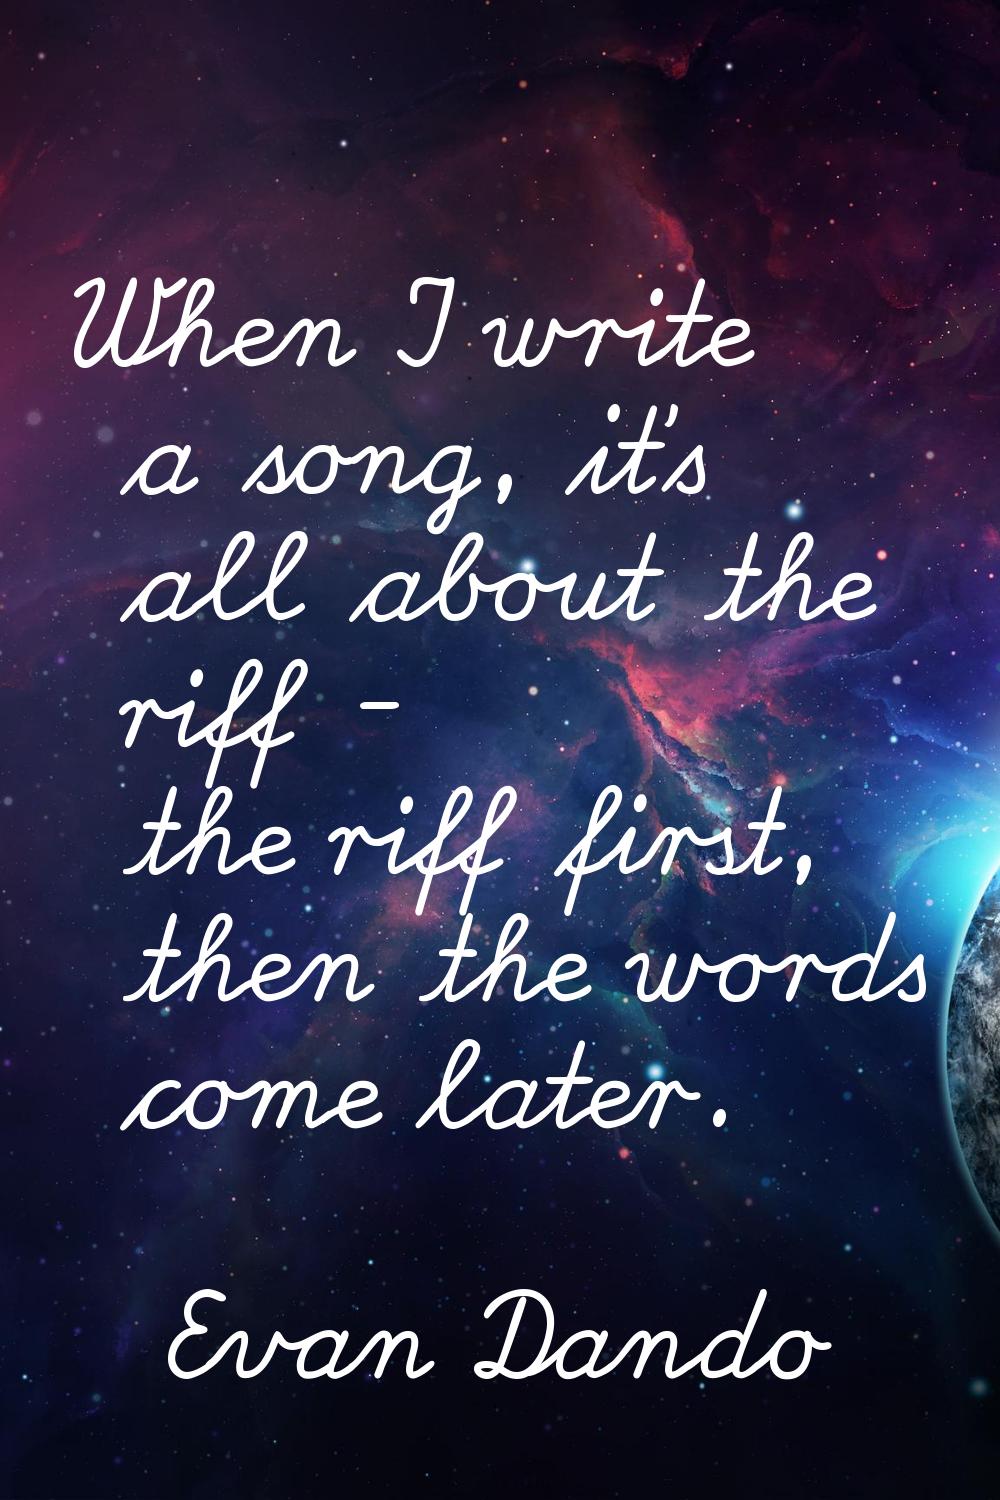 When I write a song, it's all about the riff - the riff first, then the words come later.